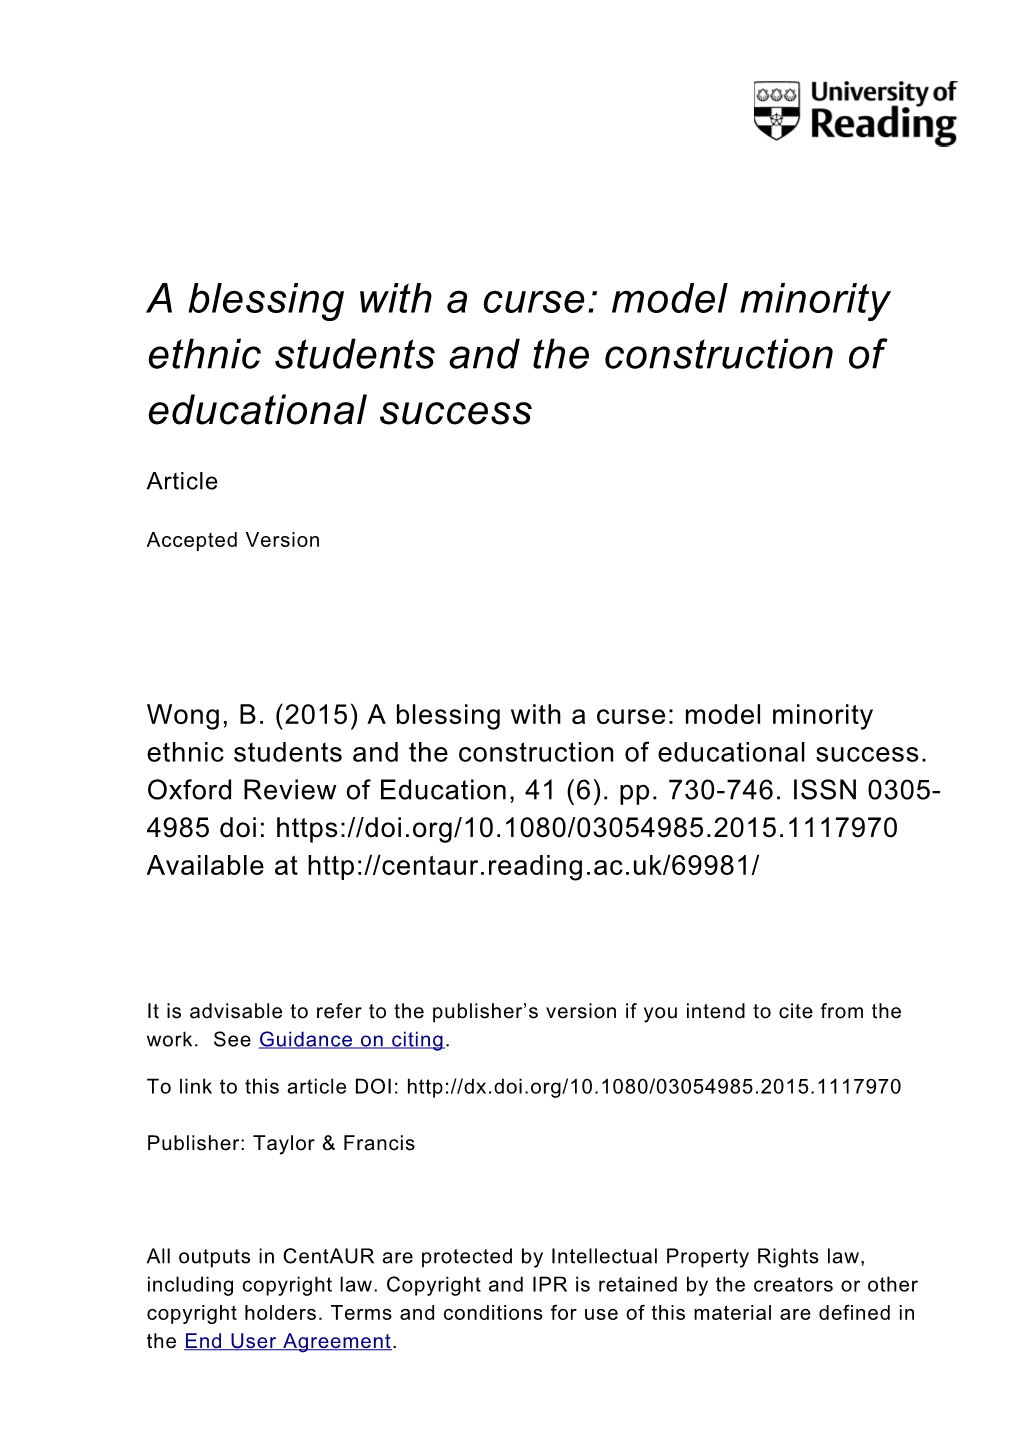 Model Minority Ethnic Students and the Construction of Educational Success